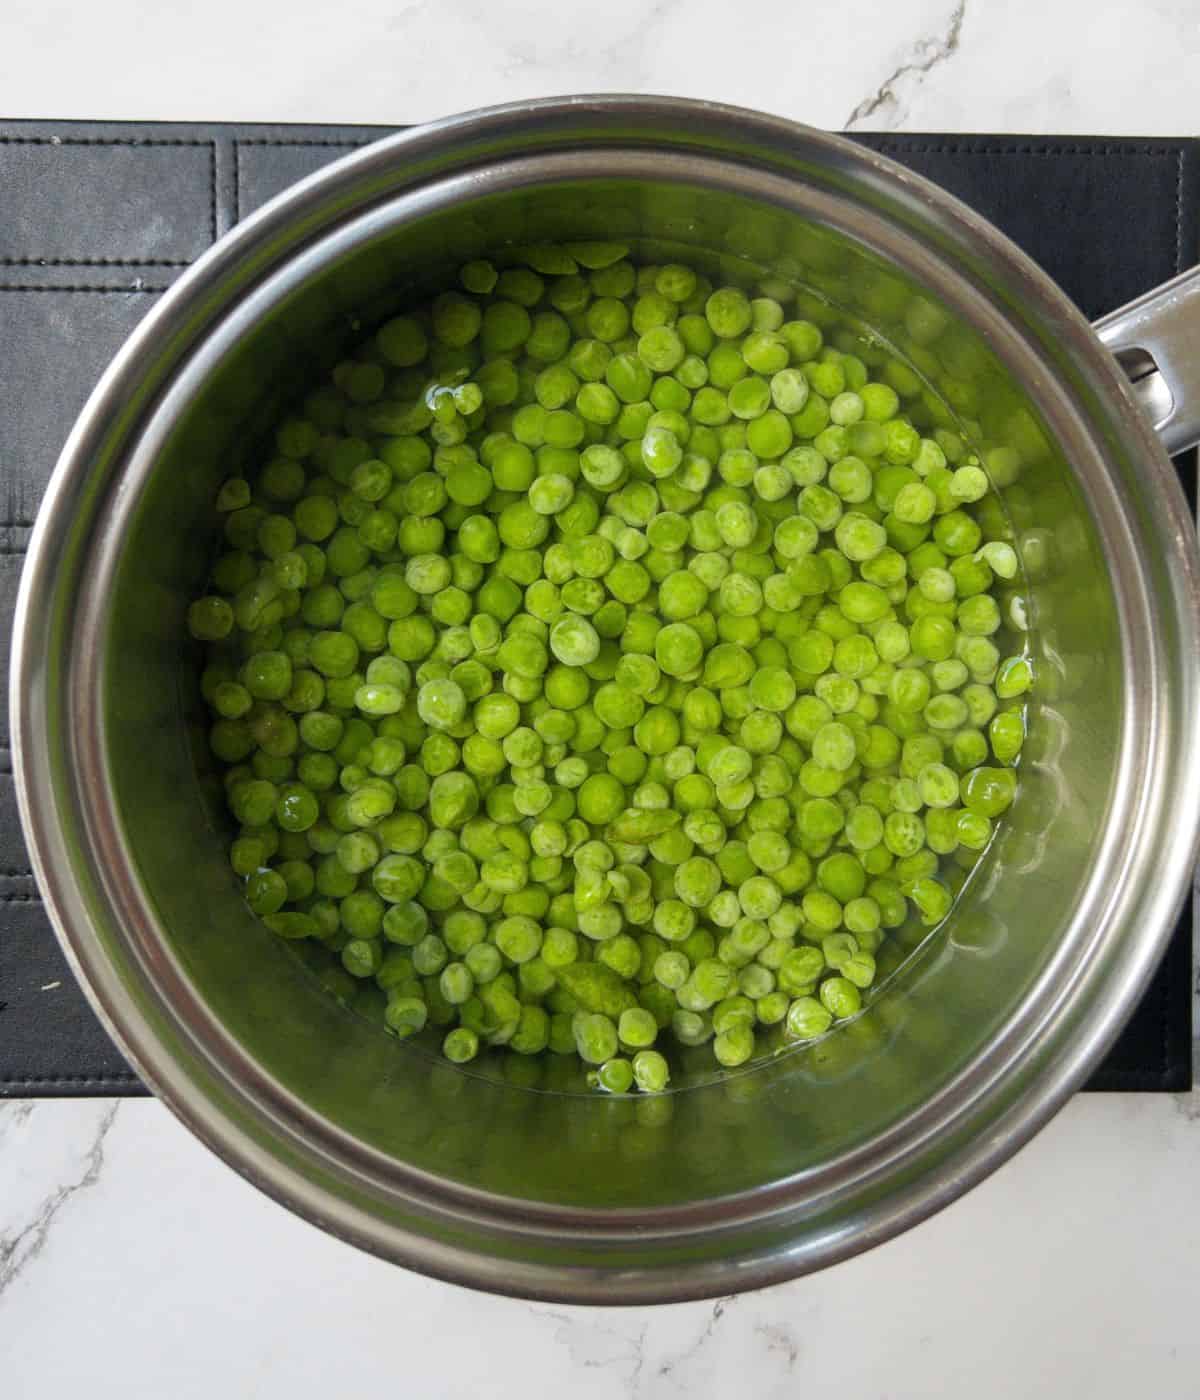 Peas in a saucepan with water.